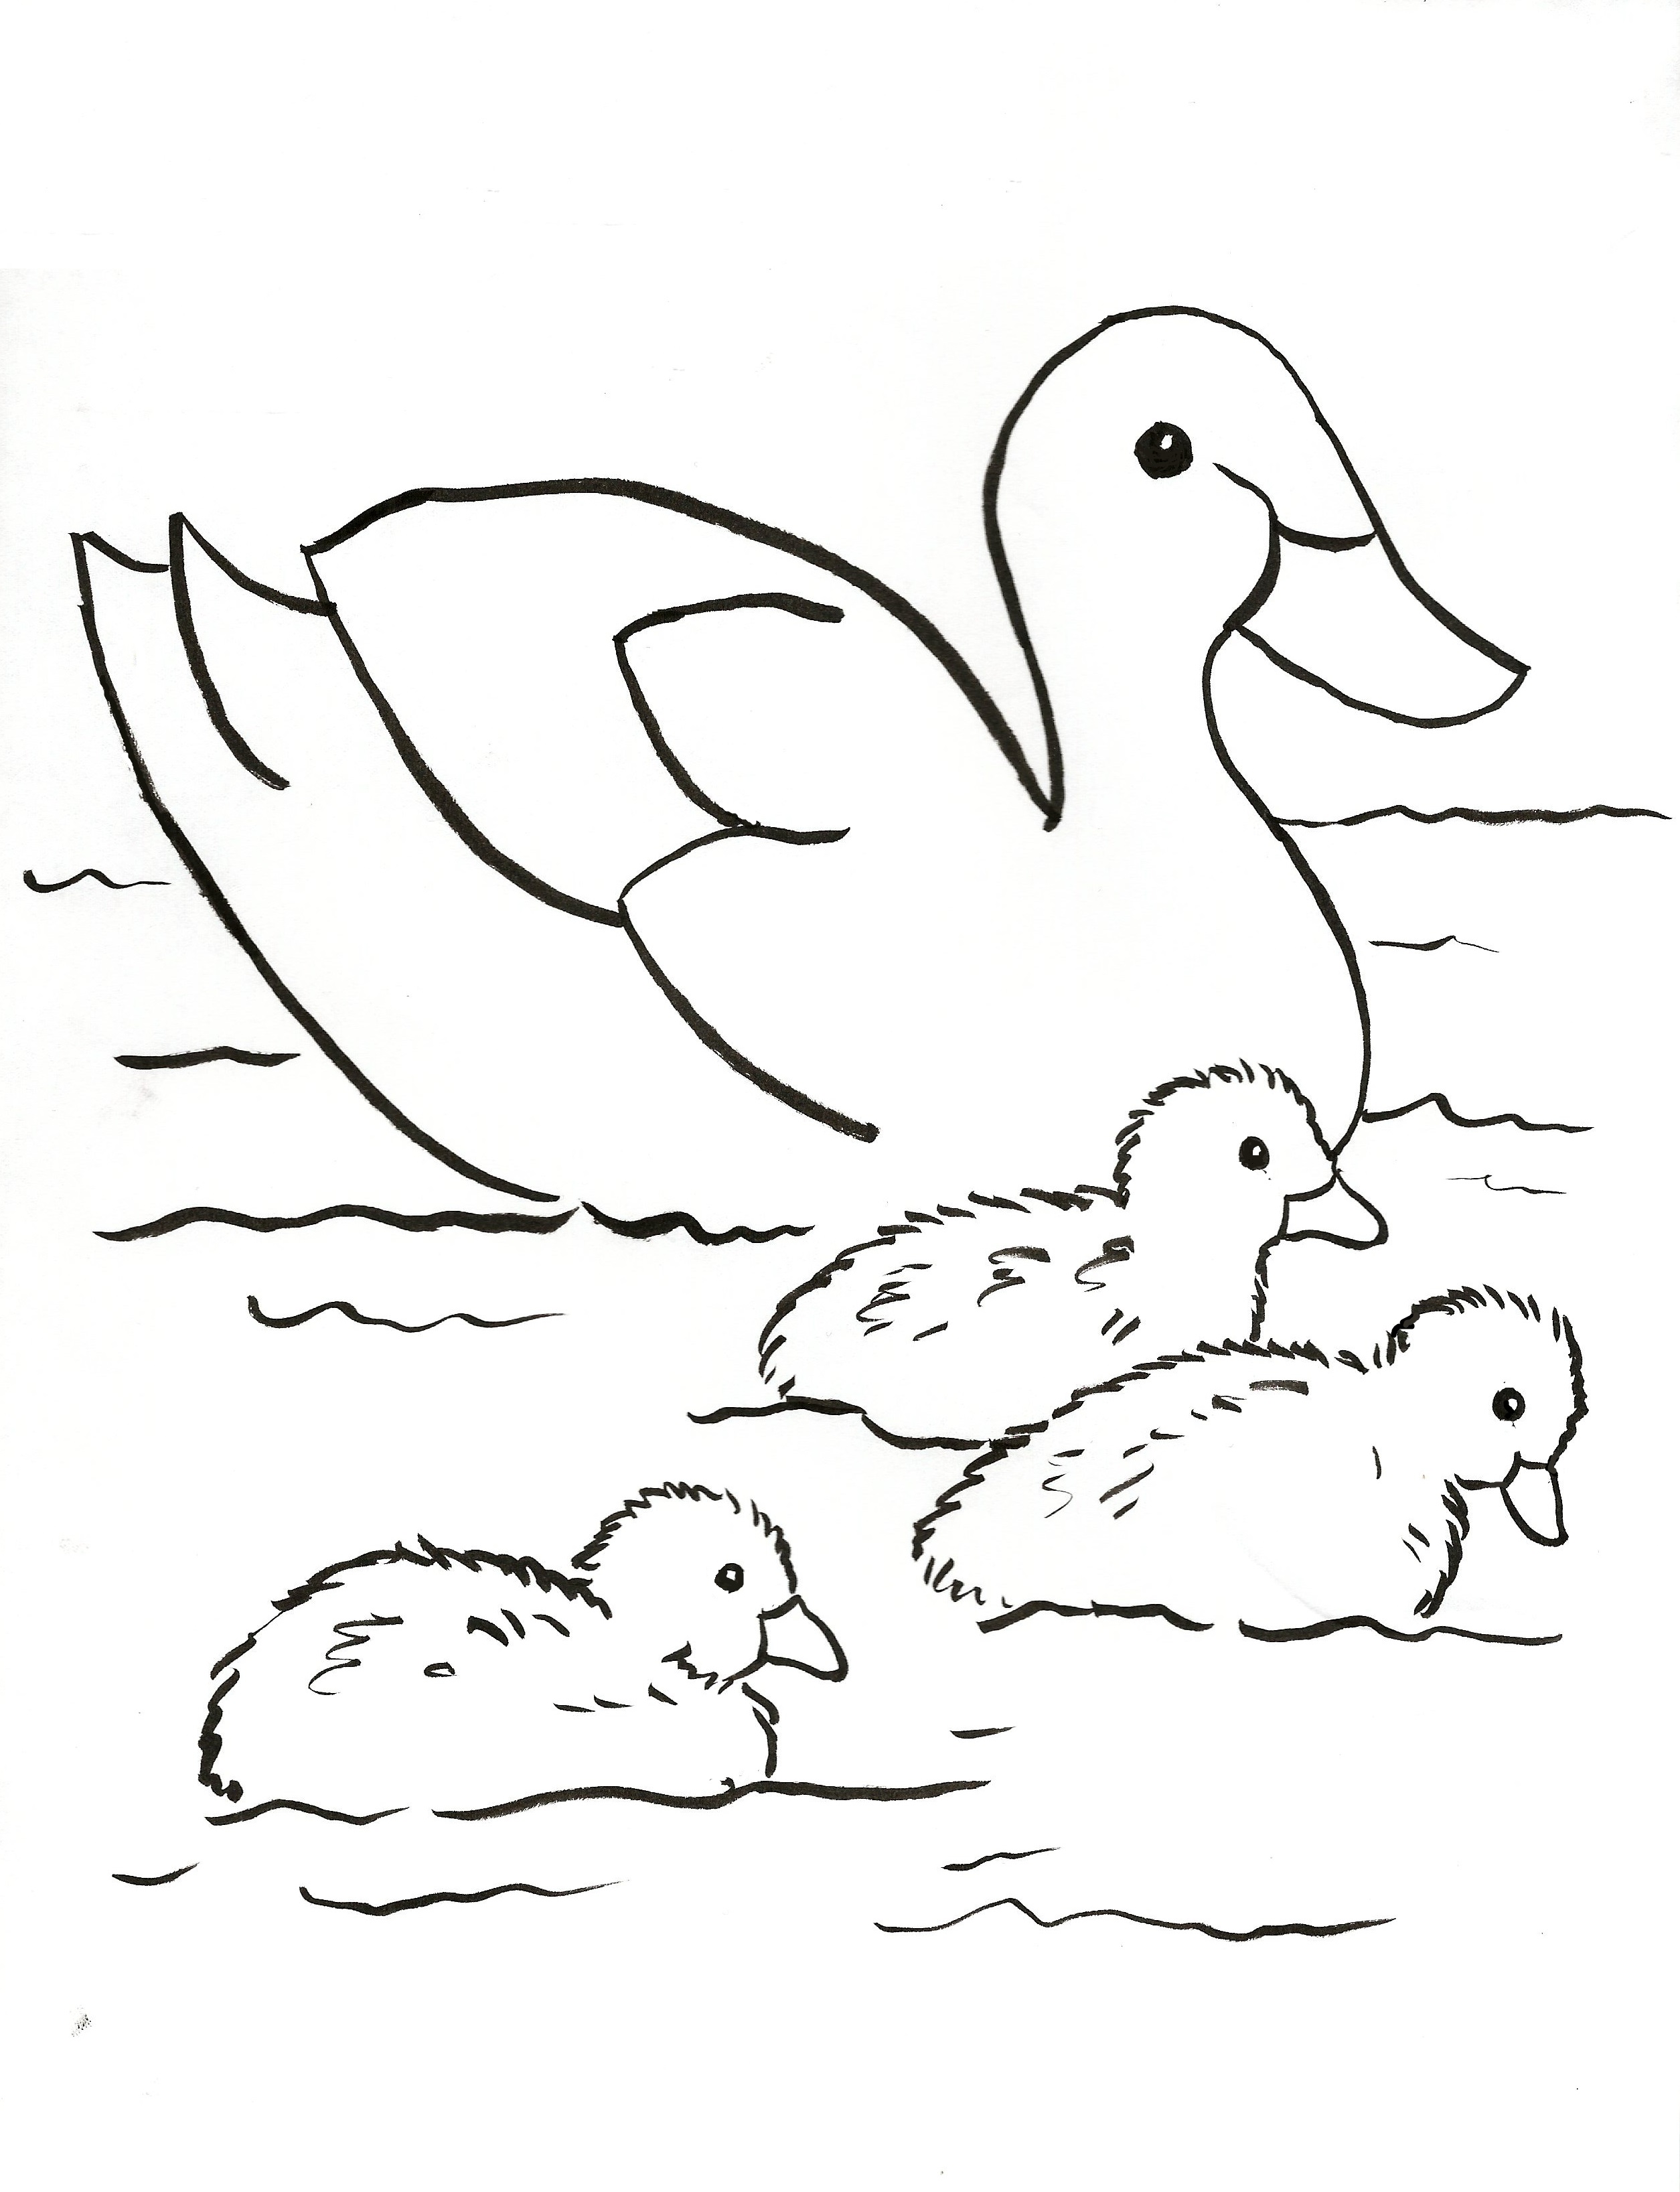 Download Duck Family Coloring Page - Art Starts